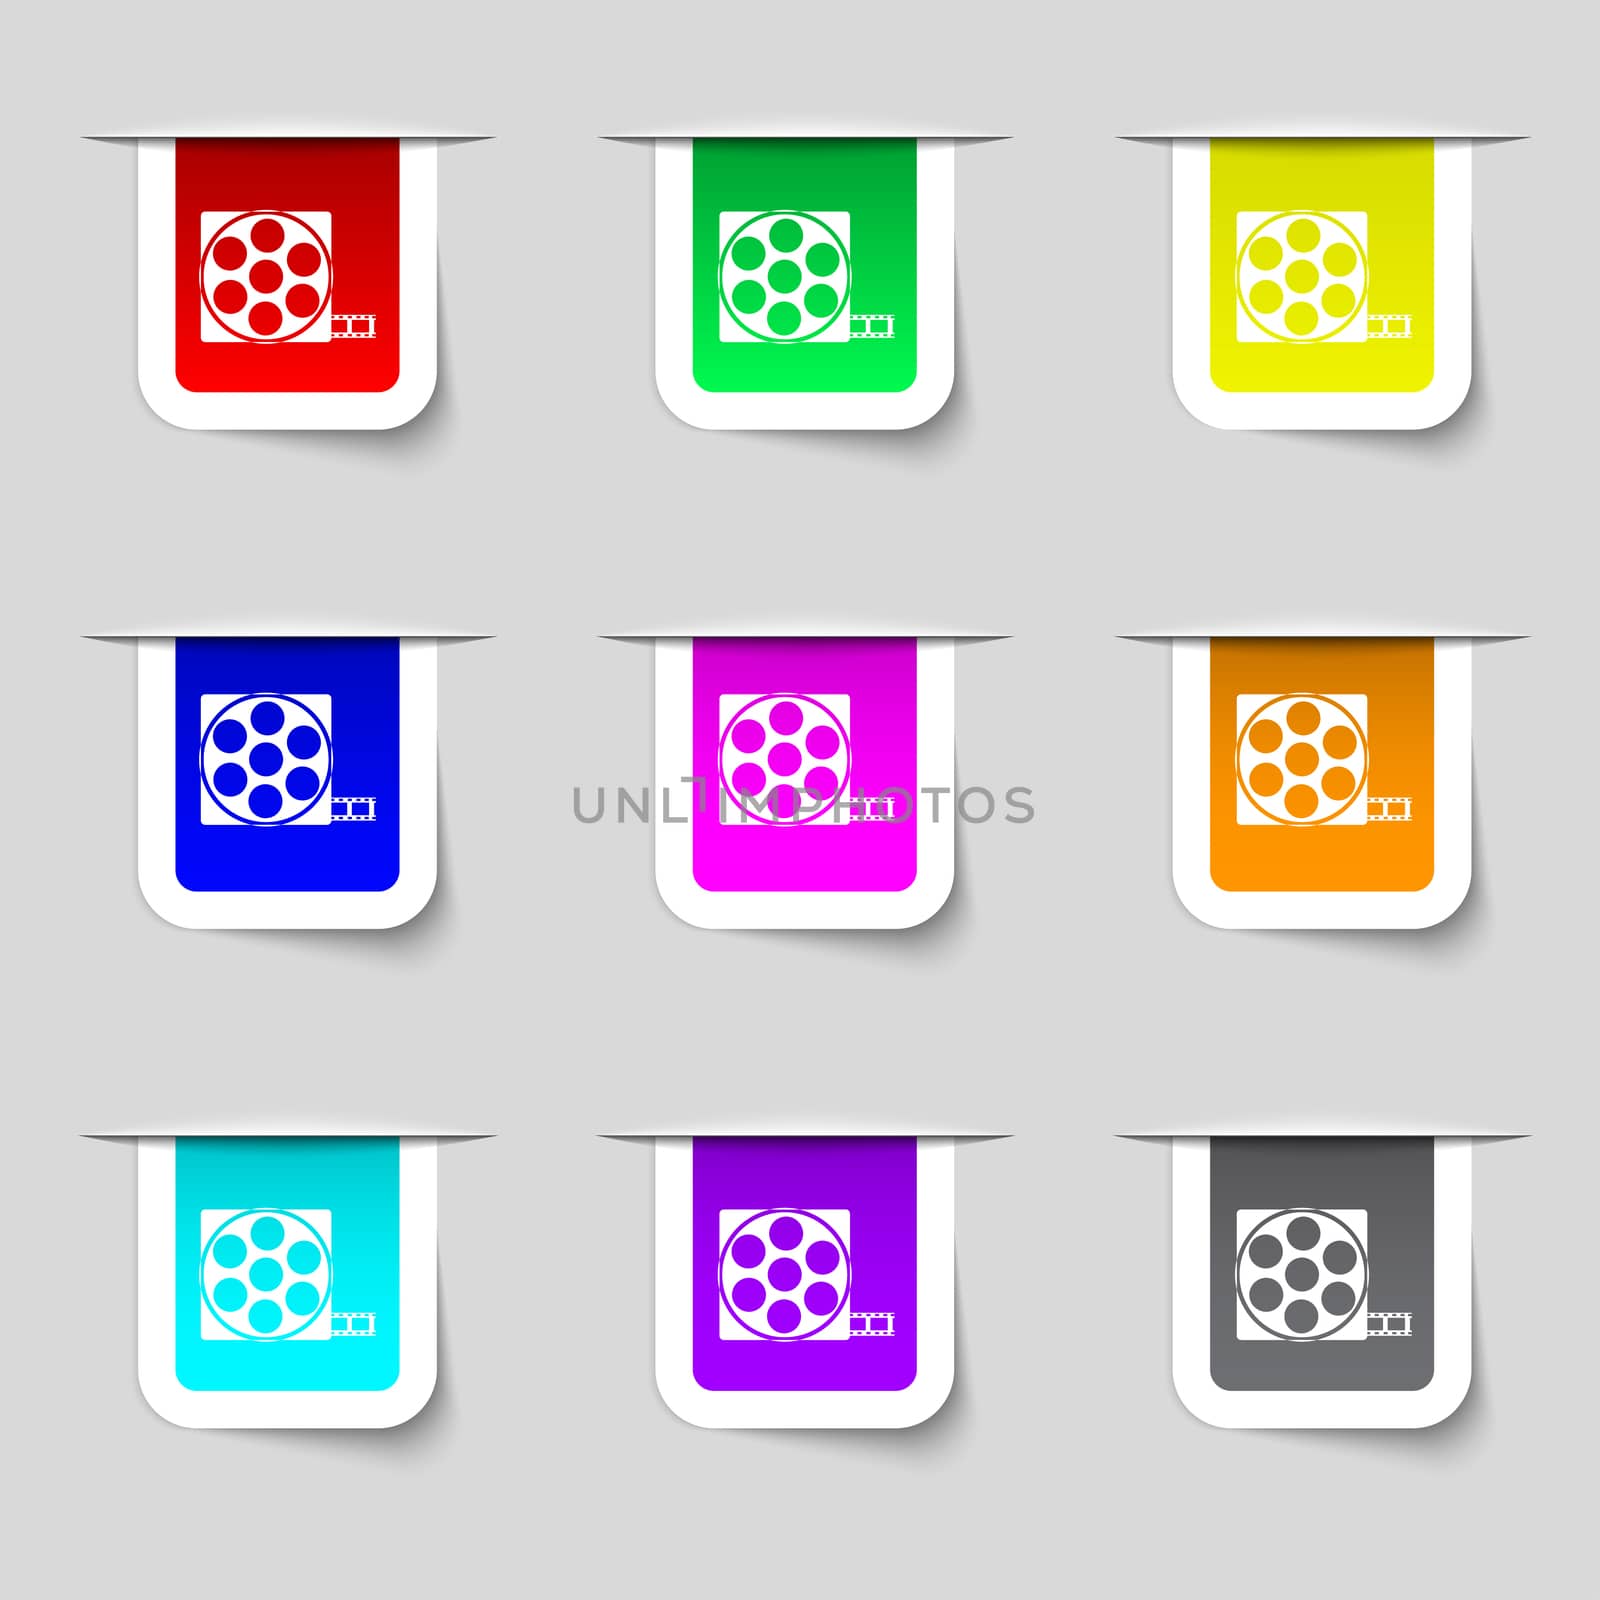 Video sign icon. frame symbol. Set colourful buttons. illustration